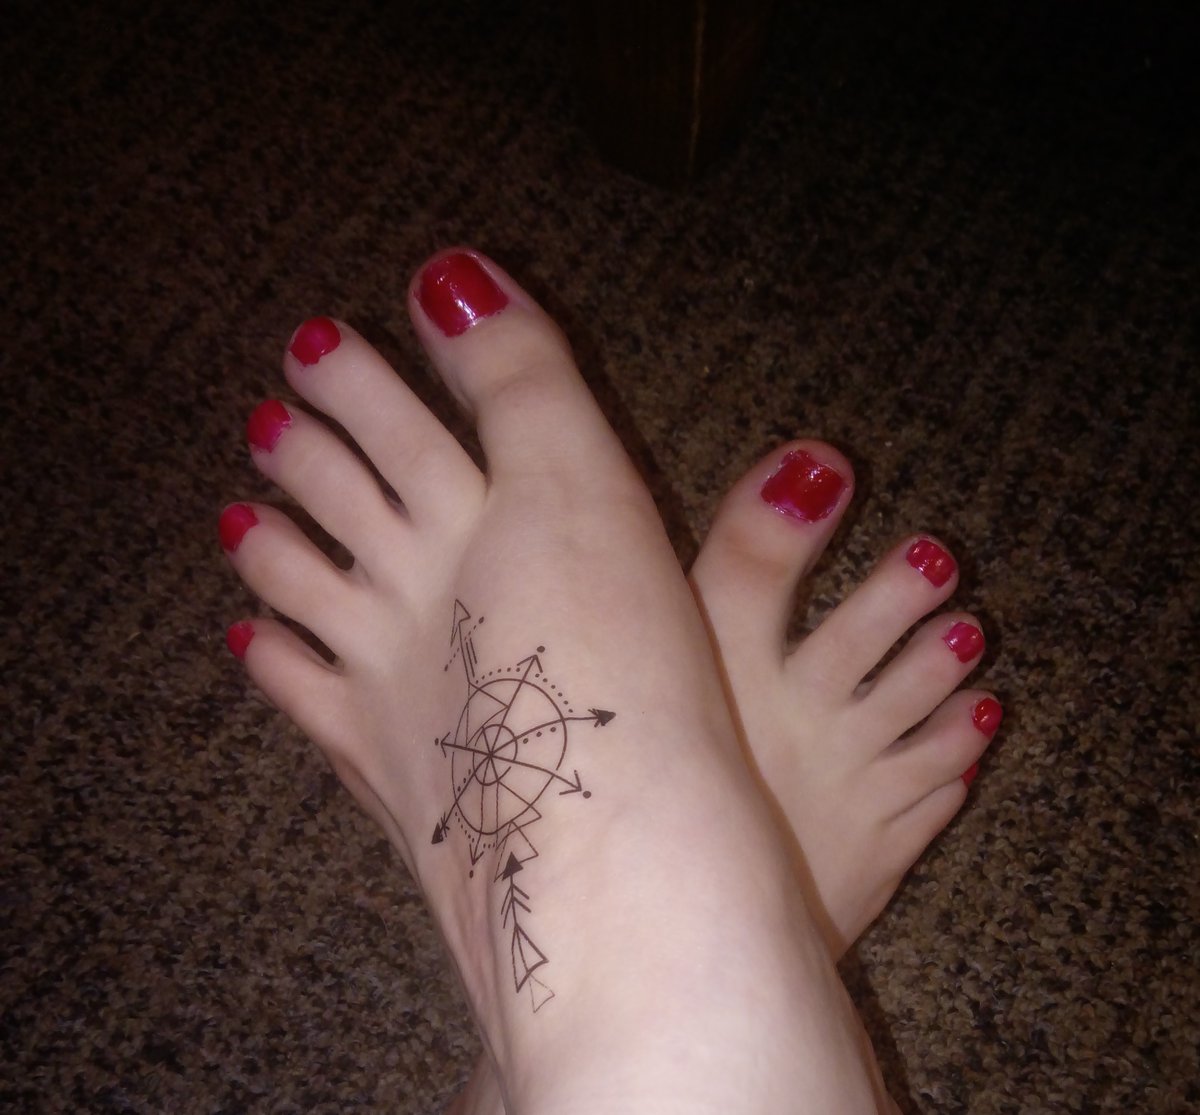 Tempted to get this #tattoo for real. #redordead #footfetish #paypig #daintyfeet #uksize5 #smallfeet #footworship #paypigs #cherrytoes